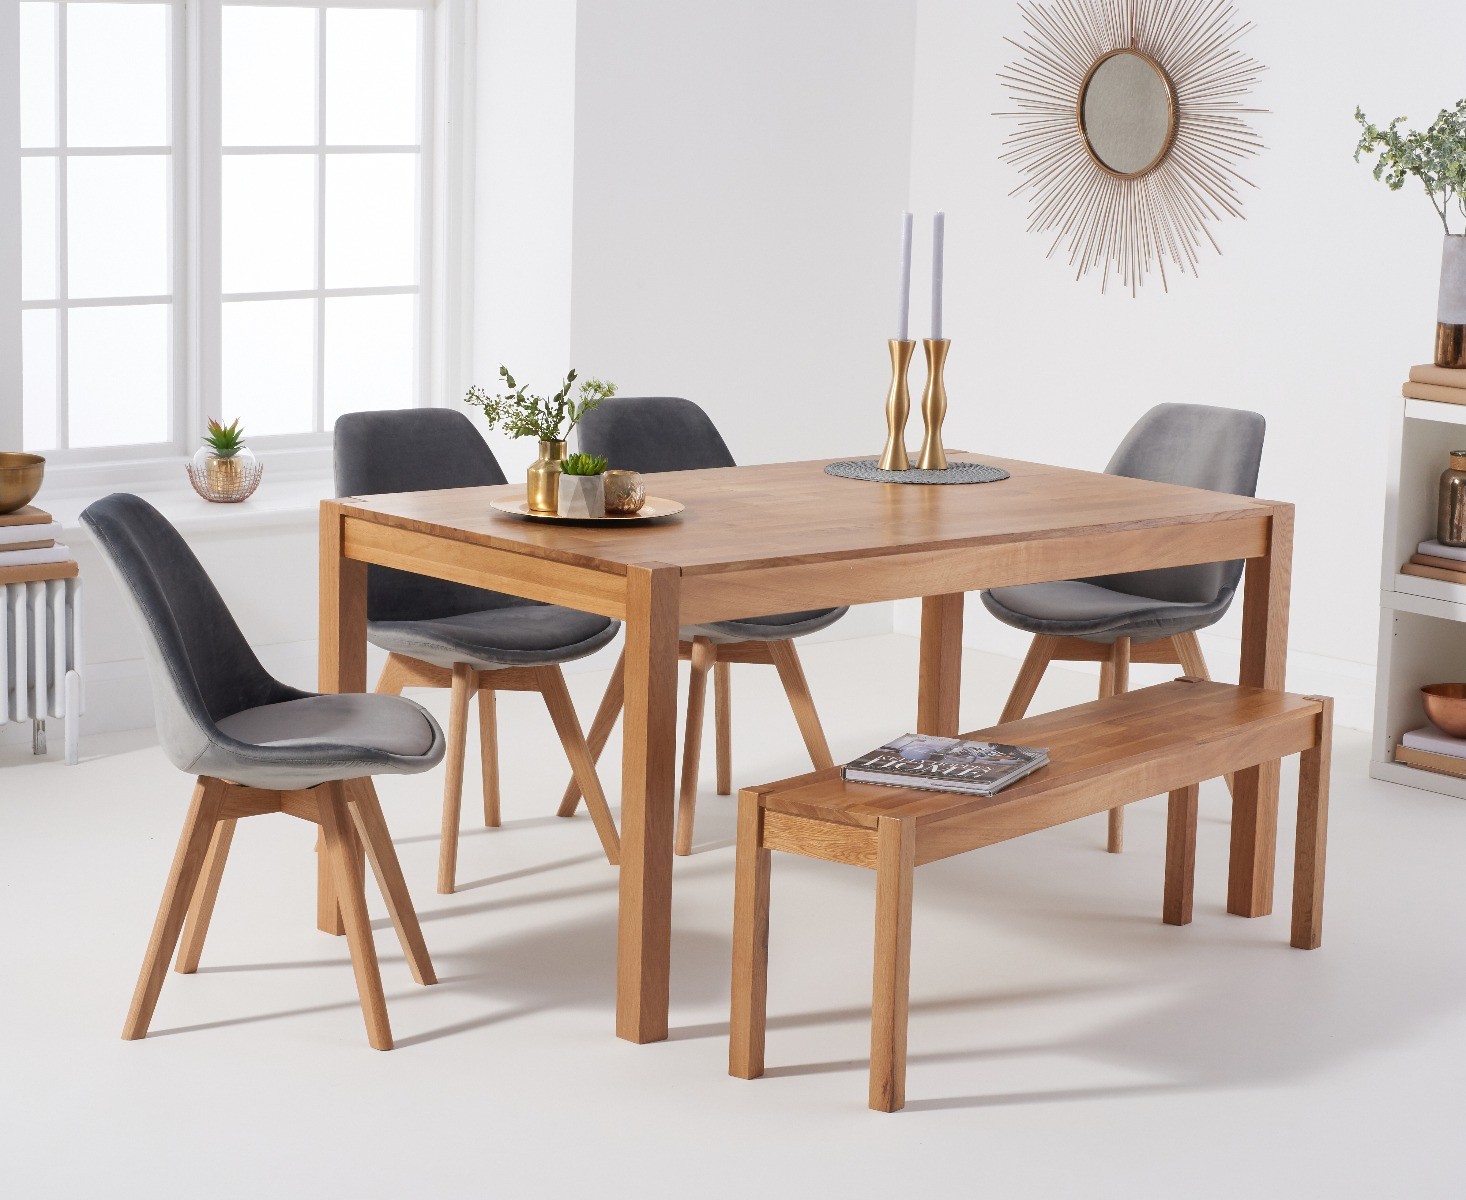 York 150cm Solid Oak Dining Table With 2 Grey Orson Velvet Chairs And 1 Bench